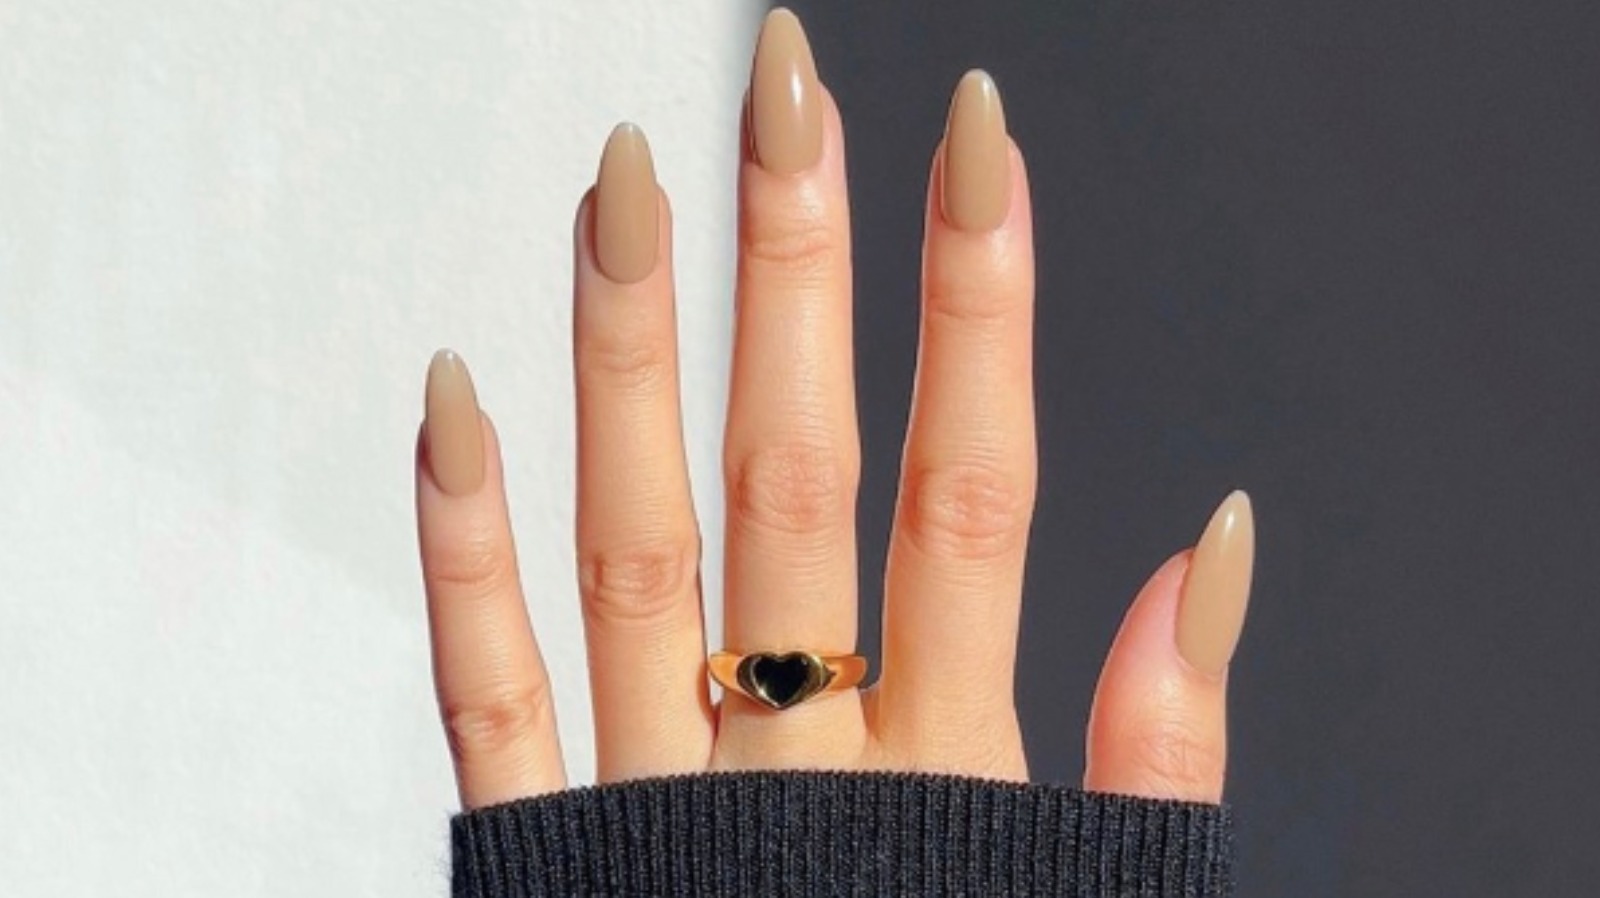 6. Classy Nude Nail Designs for a Subtle and Sophisticated Look - wide 6